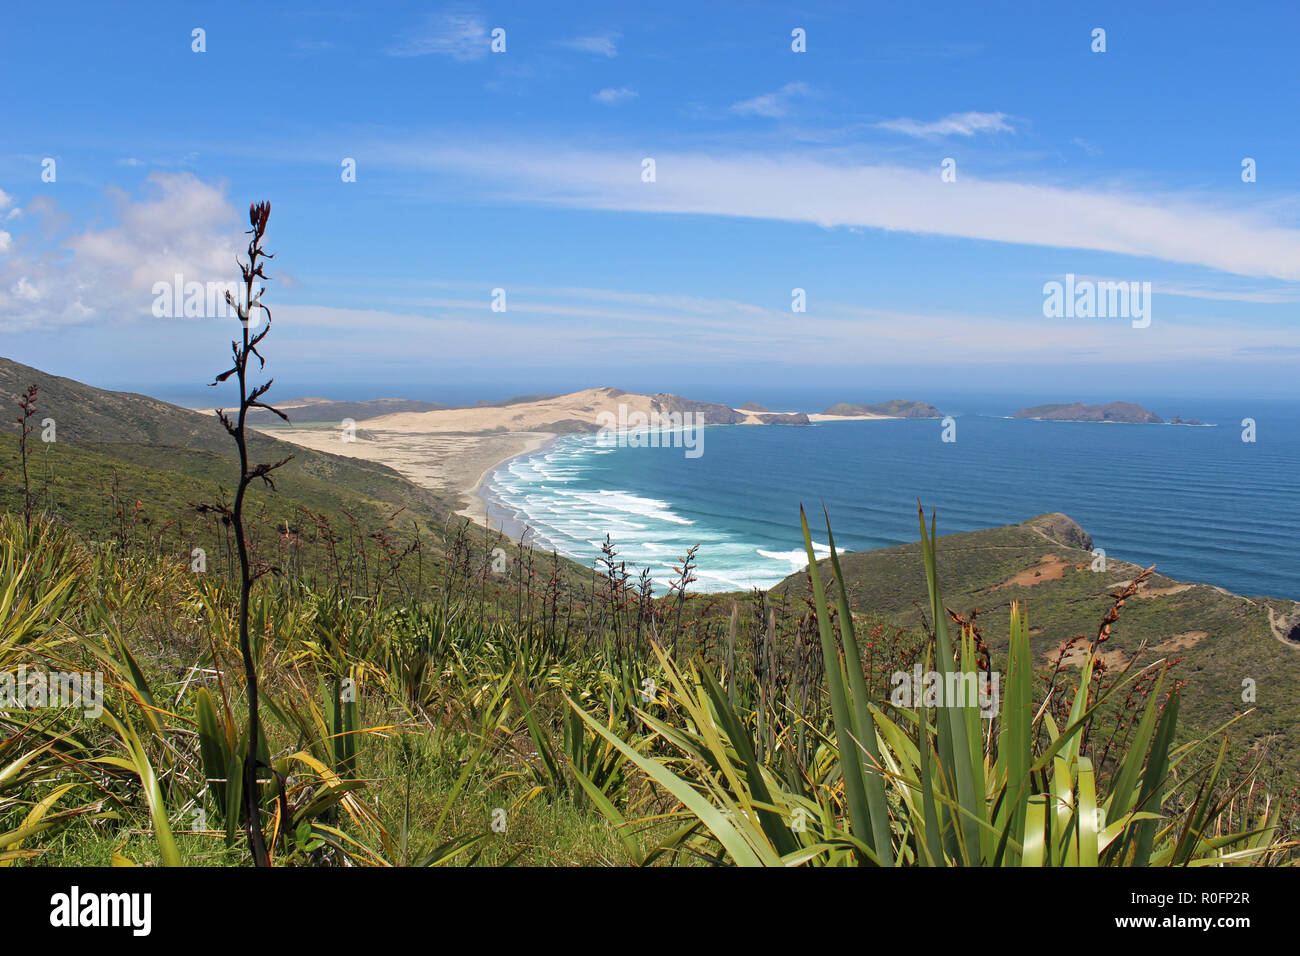 The unspoilt coastal beaches of Cape Reinga lapped by the Tasman Sea.  Most northerly point of New Zealand's North Island Stock Photo